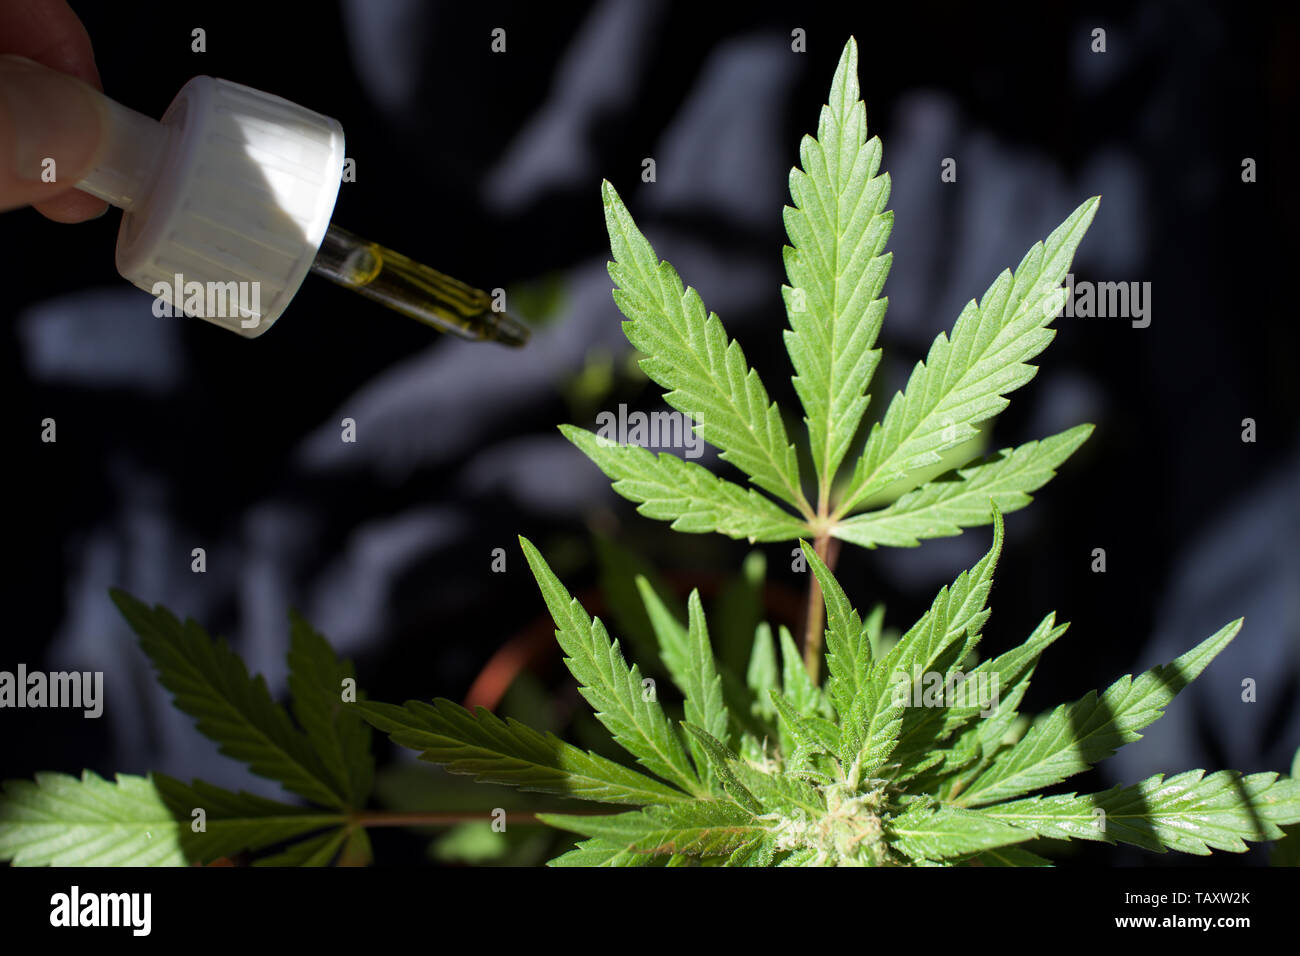 Cannabis plant with CBD oil dropper, next to cannabis leaf Stock Photo